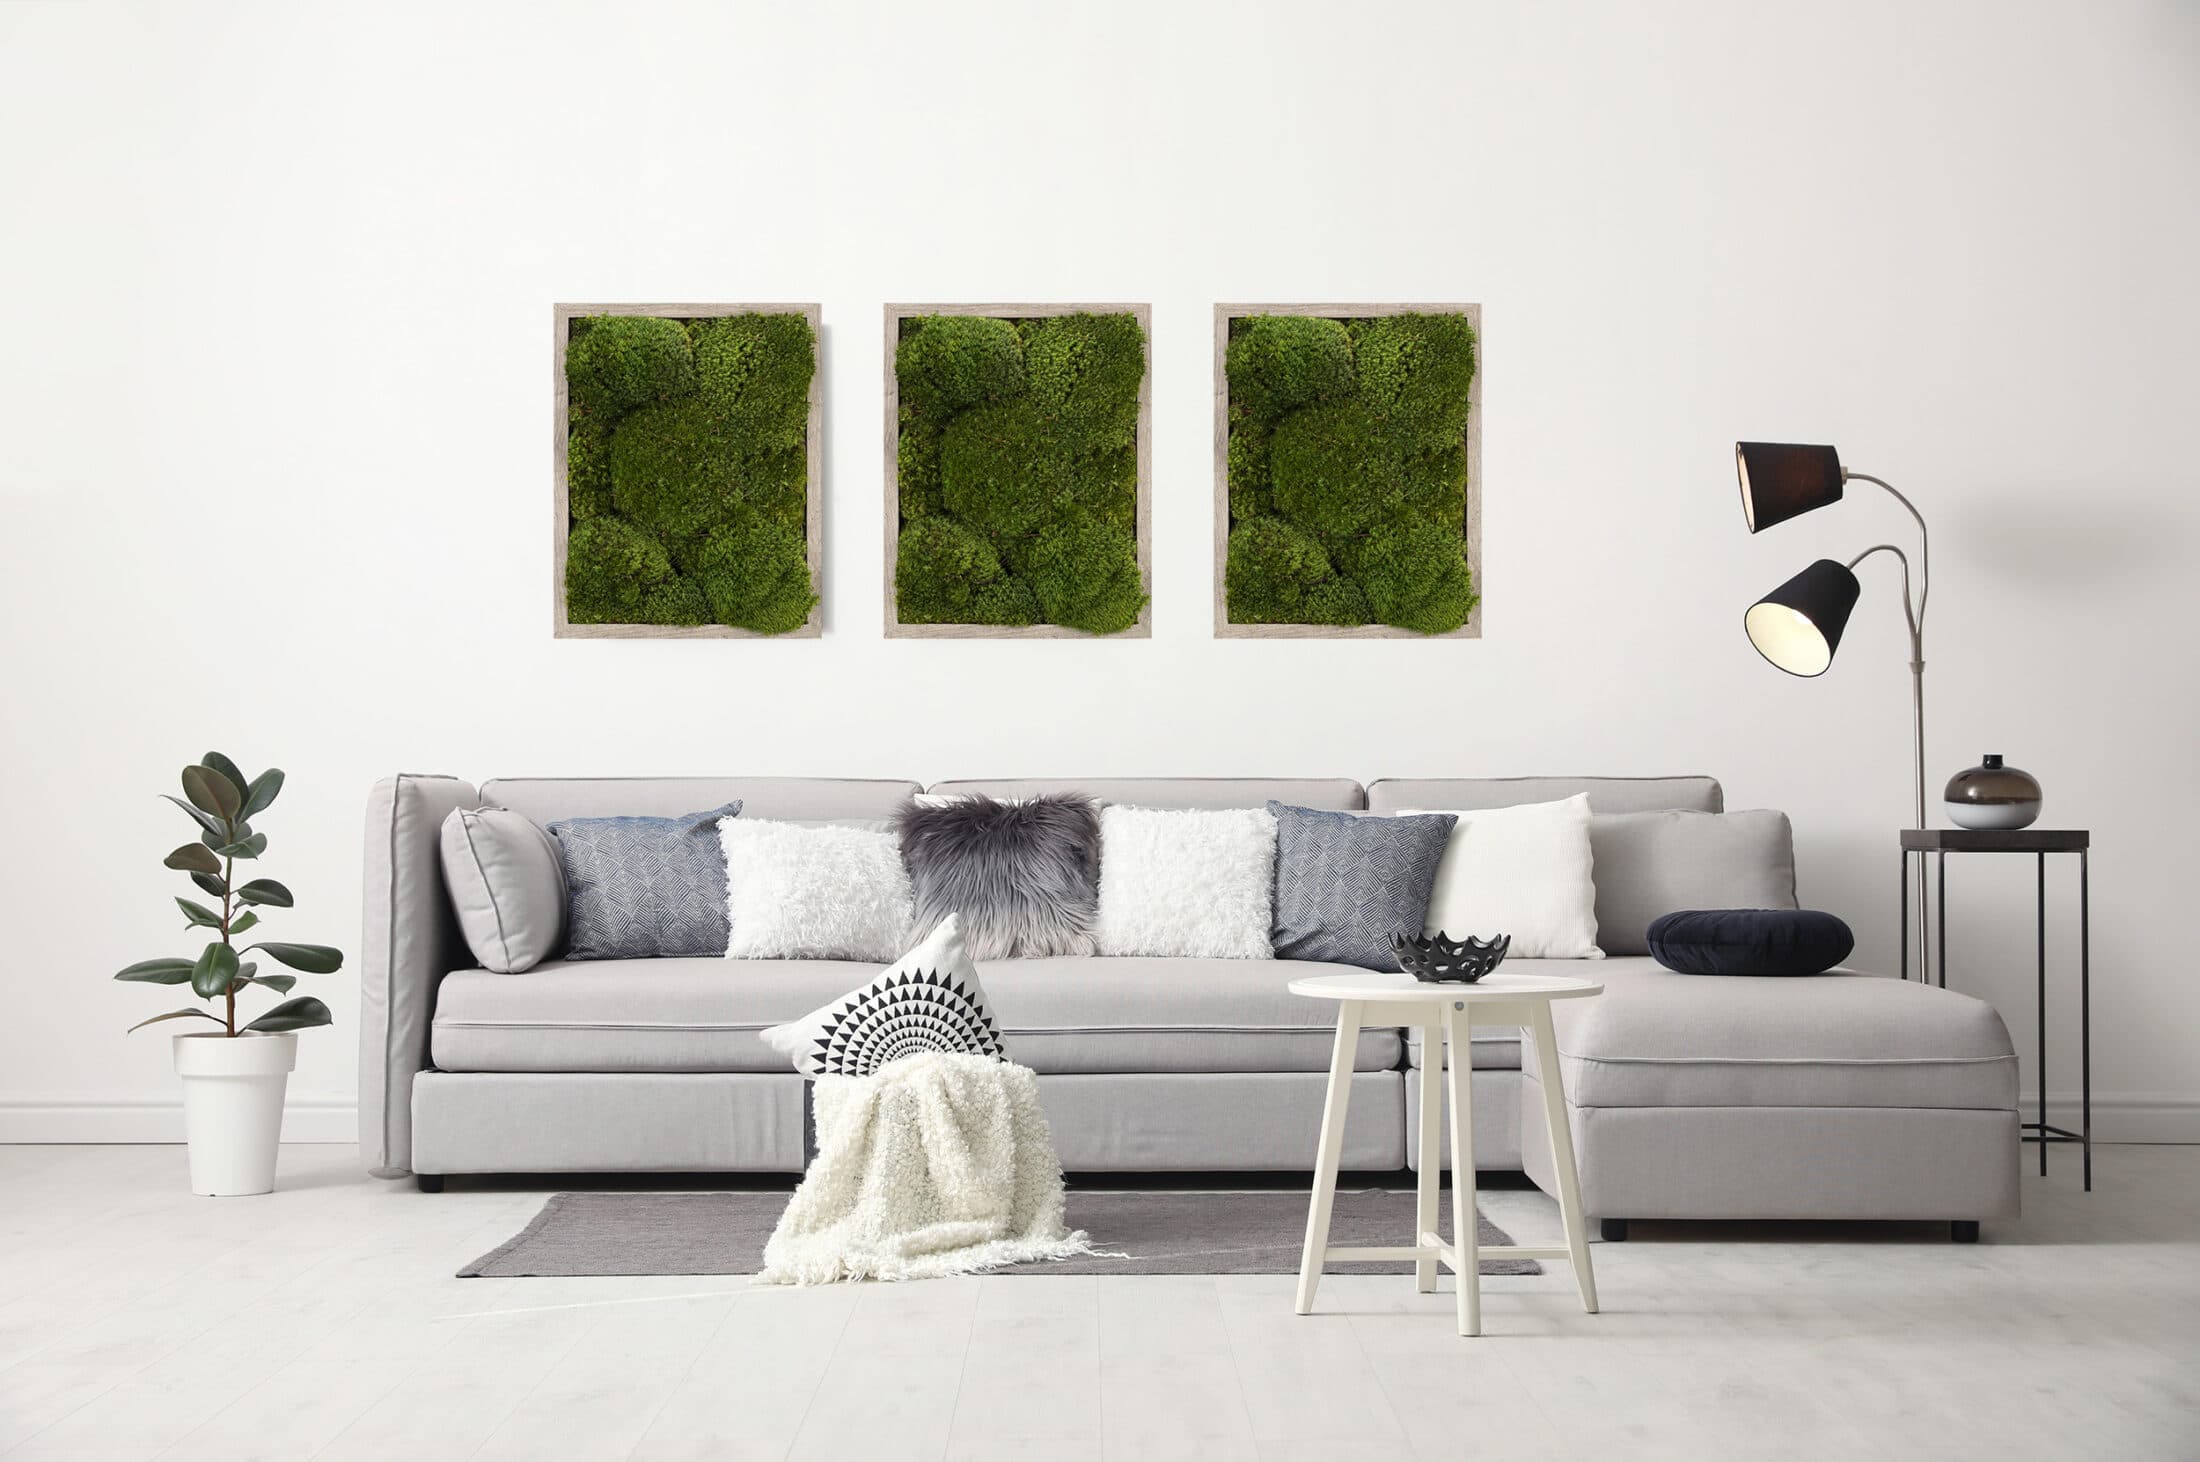 Moss wall art gray frame improve air quality provide stress relief.